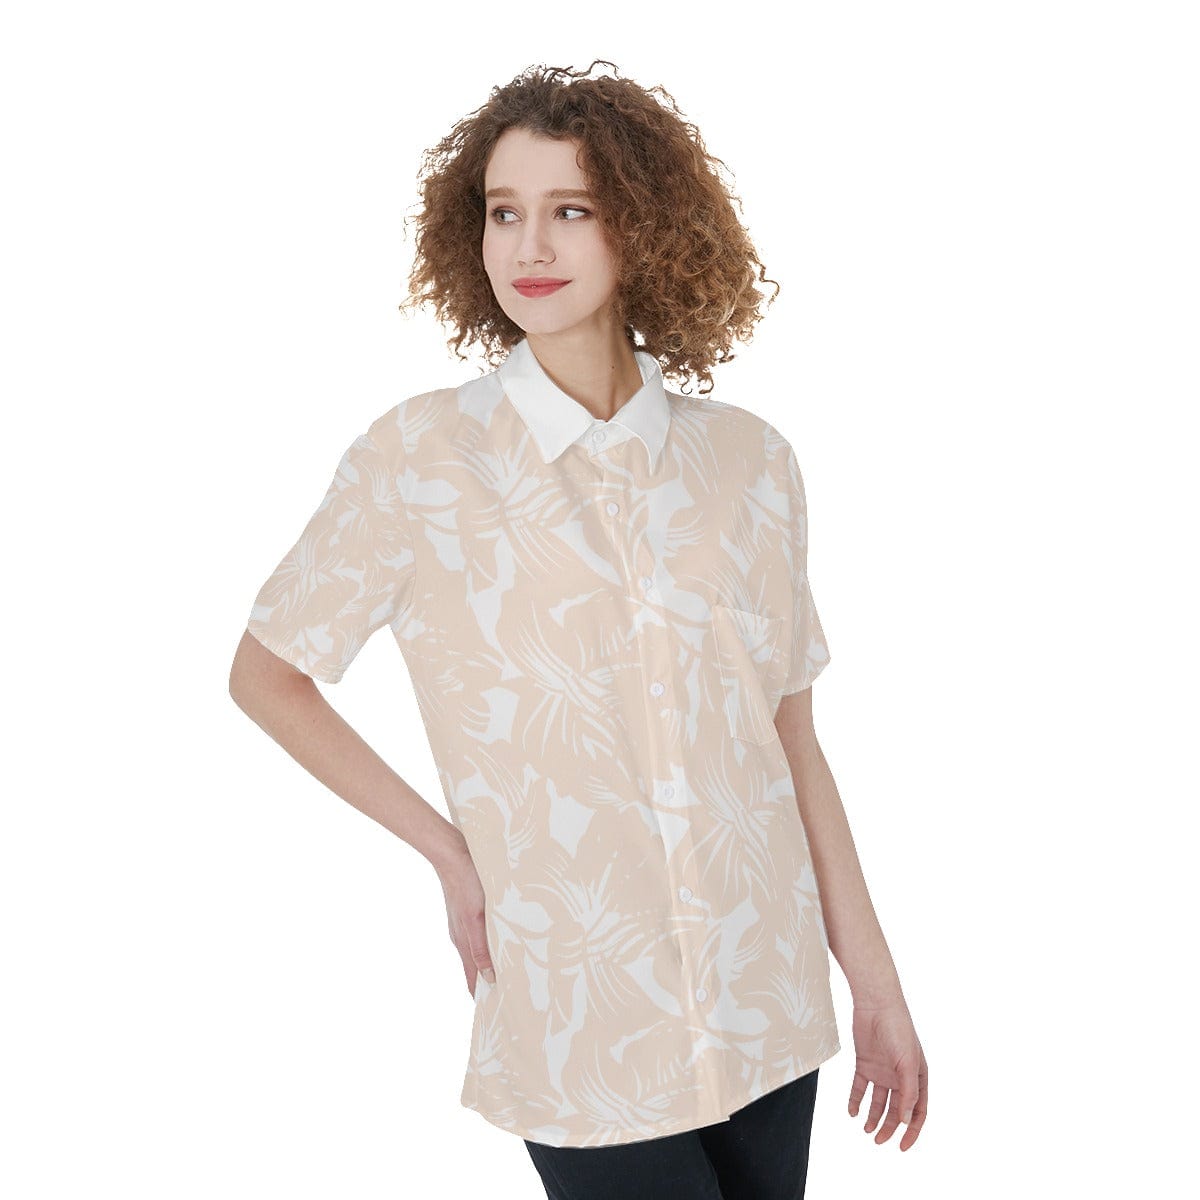 Yoycol All-Over Print Women's Short Sleeve Shirt With Pocket